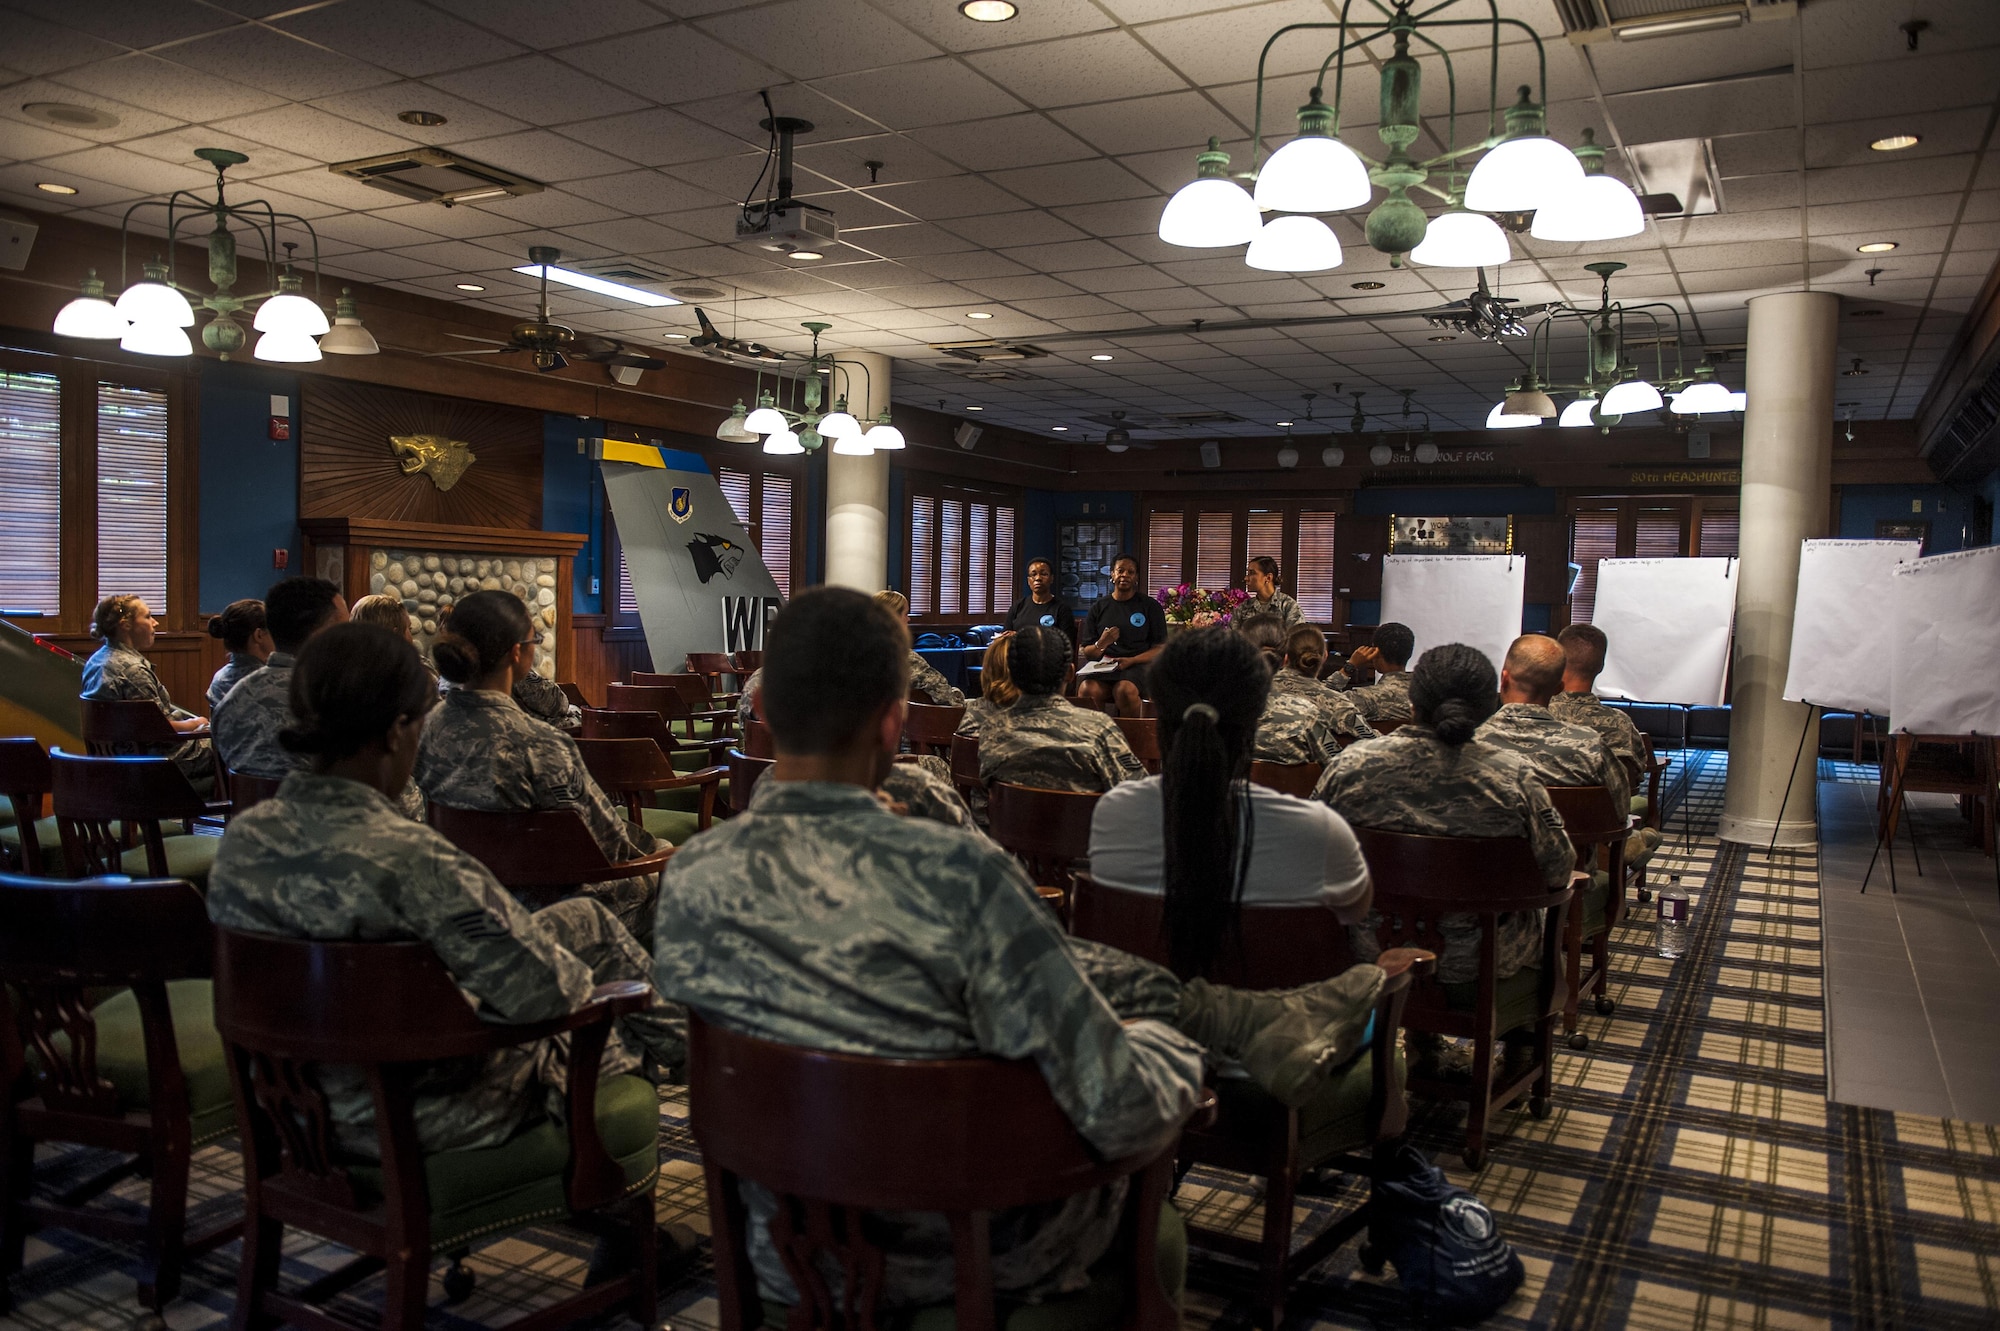 U.S. Air Force members attend a Leanin Together luncheon on Aug. 26, 2017 at Kunsan Air Base, Republic of Korea. The Leanin Together luncheon allows women and men to recognize and work through internal and external barriers with guidance from female leaders and the support of men. (U.S. Air Force photo by Senior Airman Colville McFee/Released)